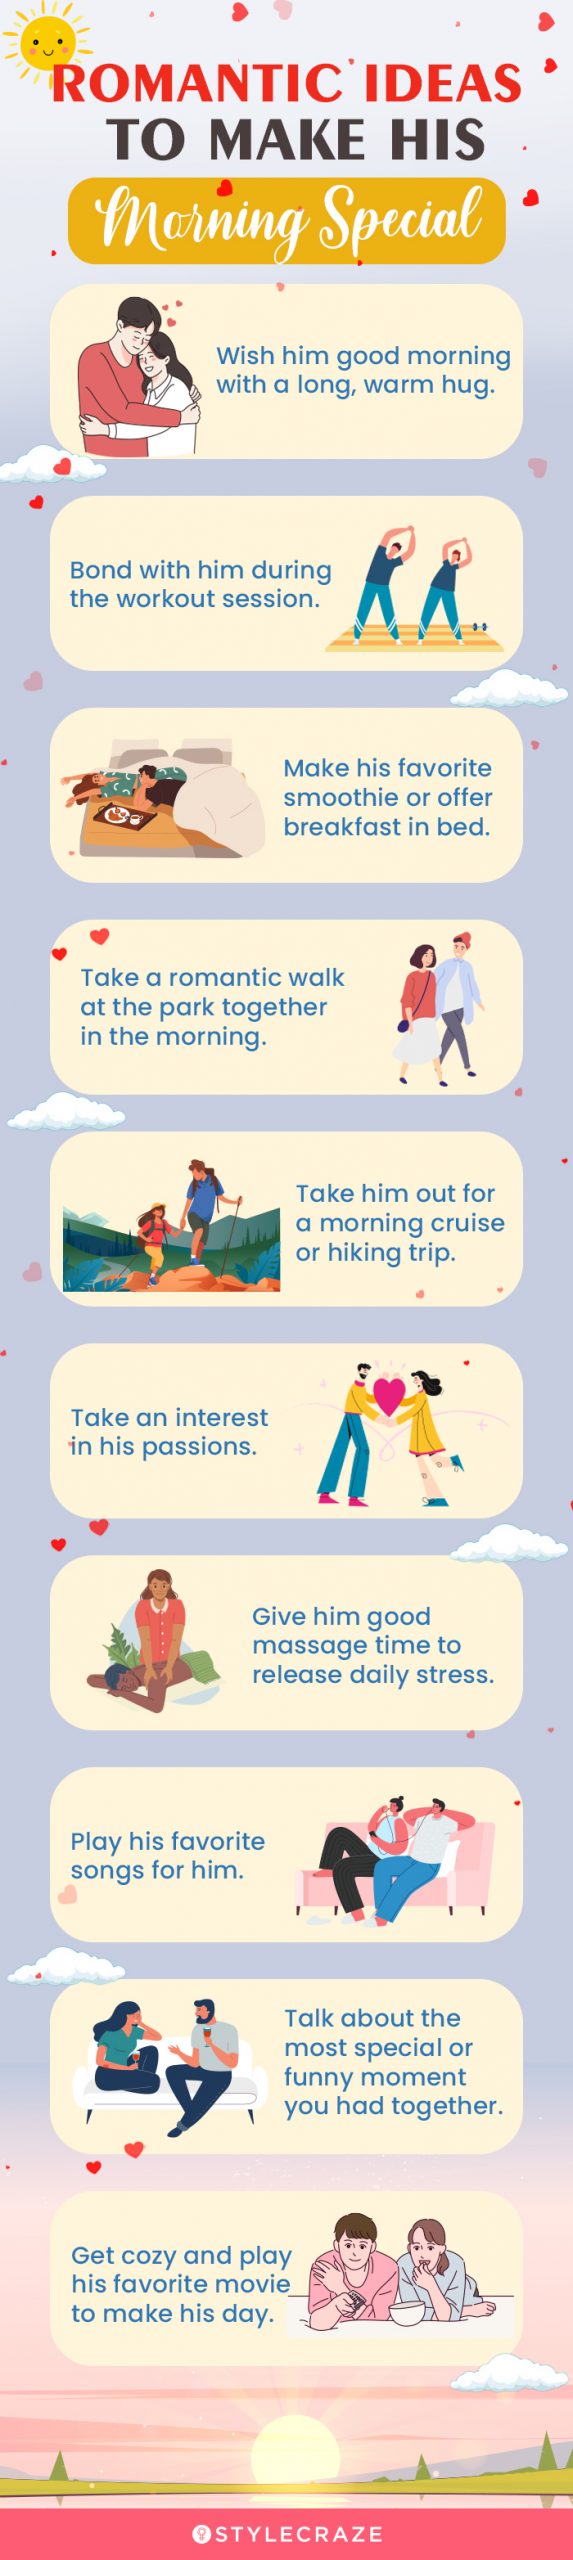 romantic ideas to make his morning special (infographic)